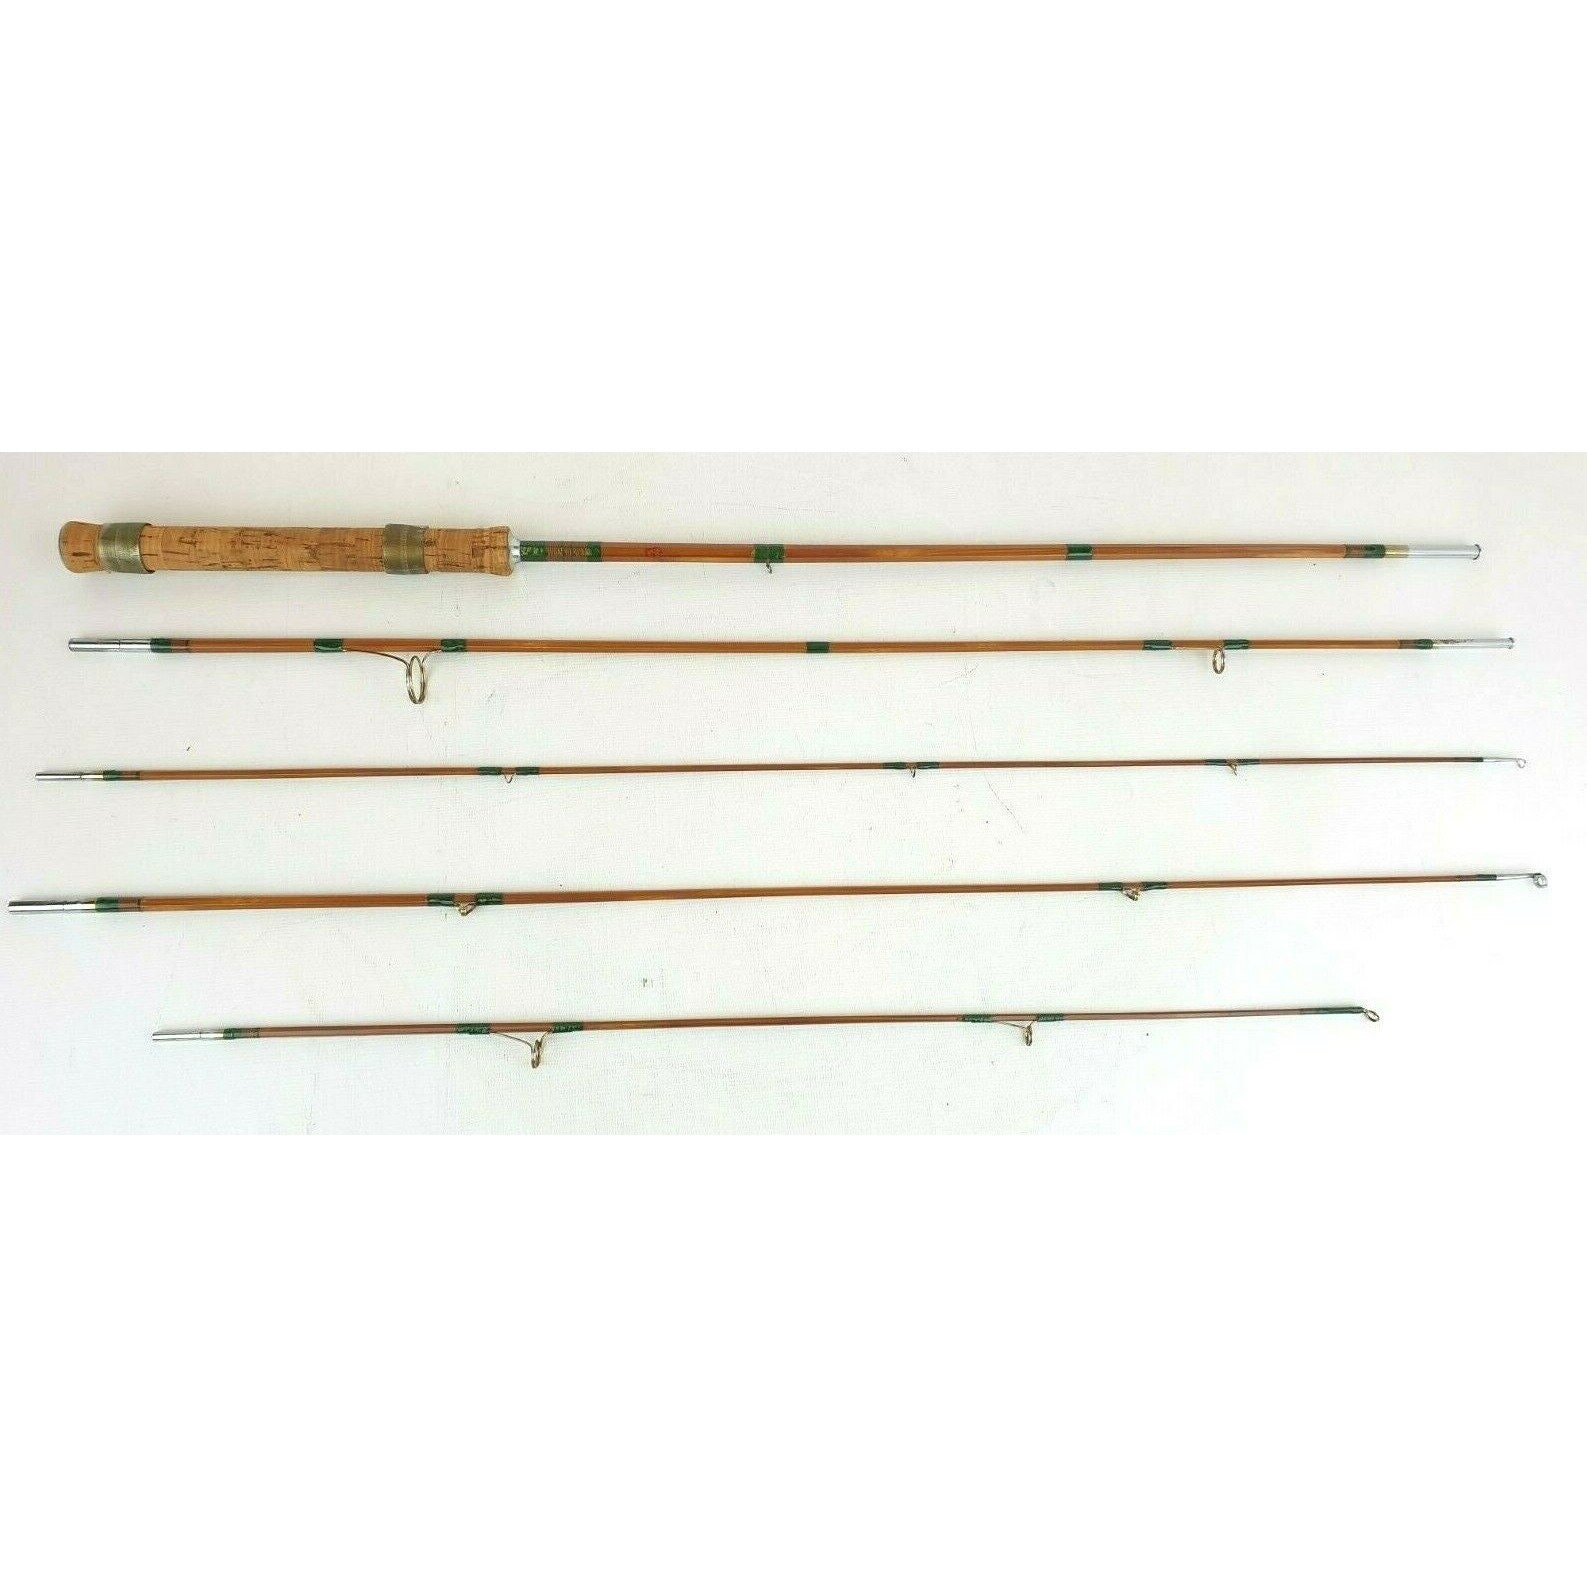 5 Piece Emperor Japan Bamboo 8ft Fishing Rod Pole Fly Fishing